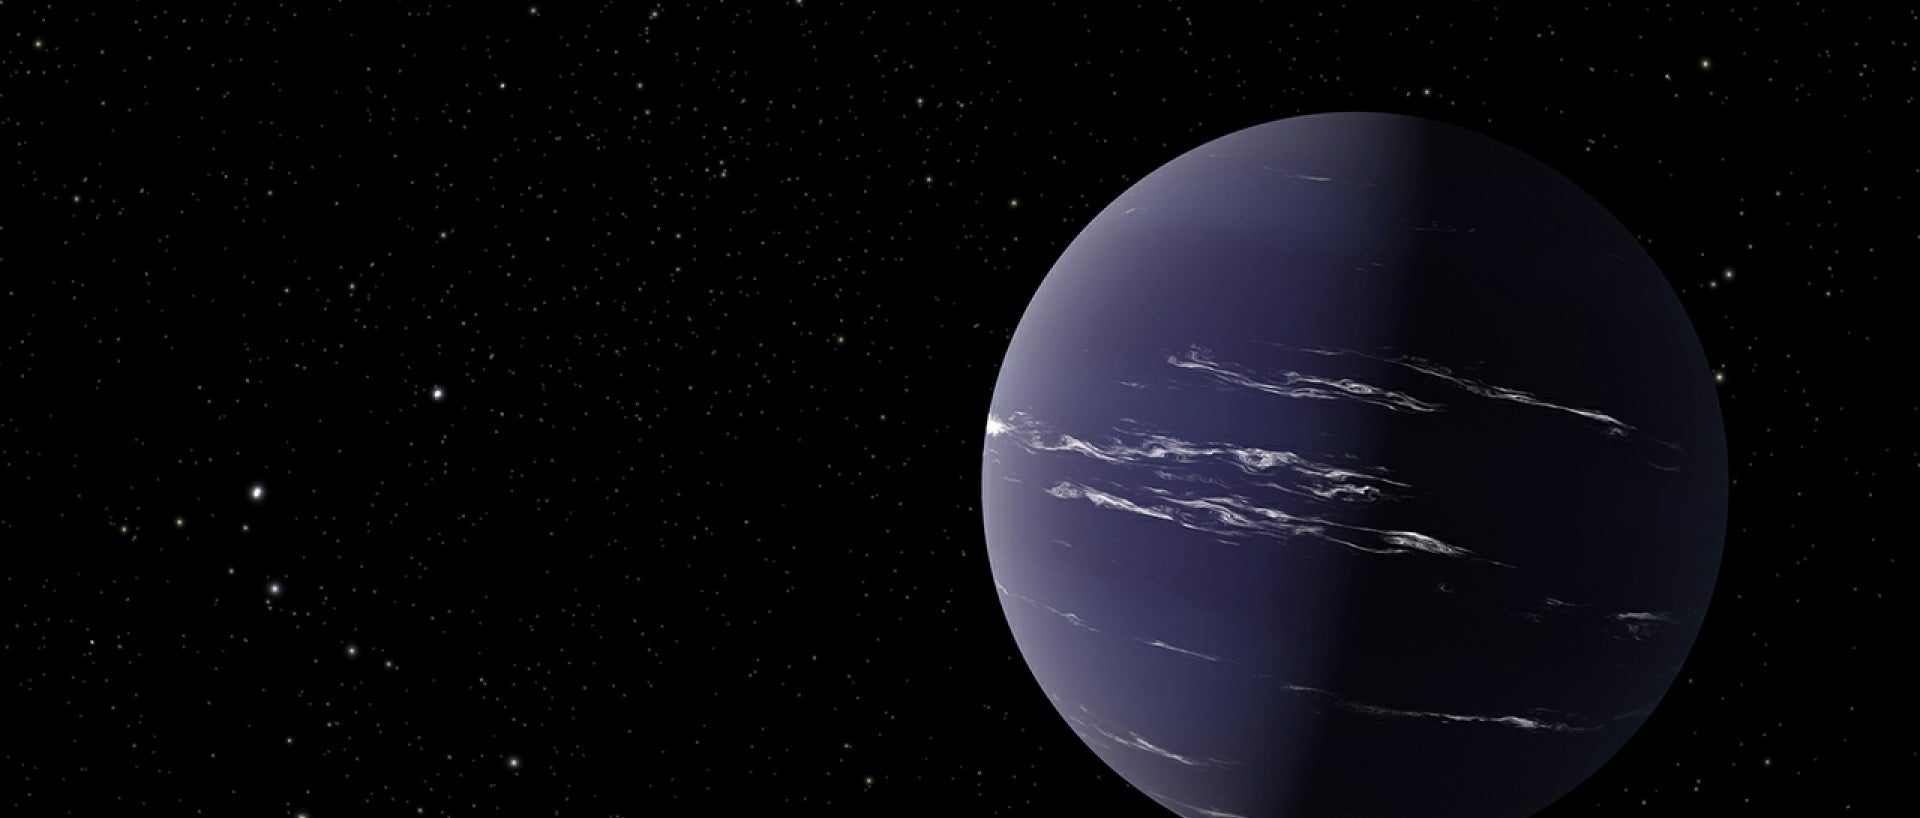 An artist's rendering of TOI-1231 b, a Neptune-like planet about 90 light years away from Earth.